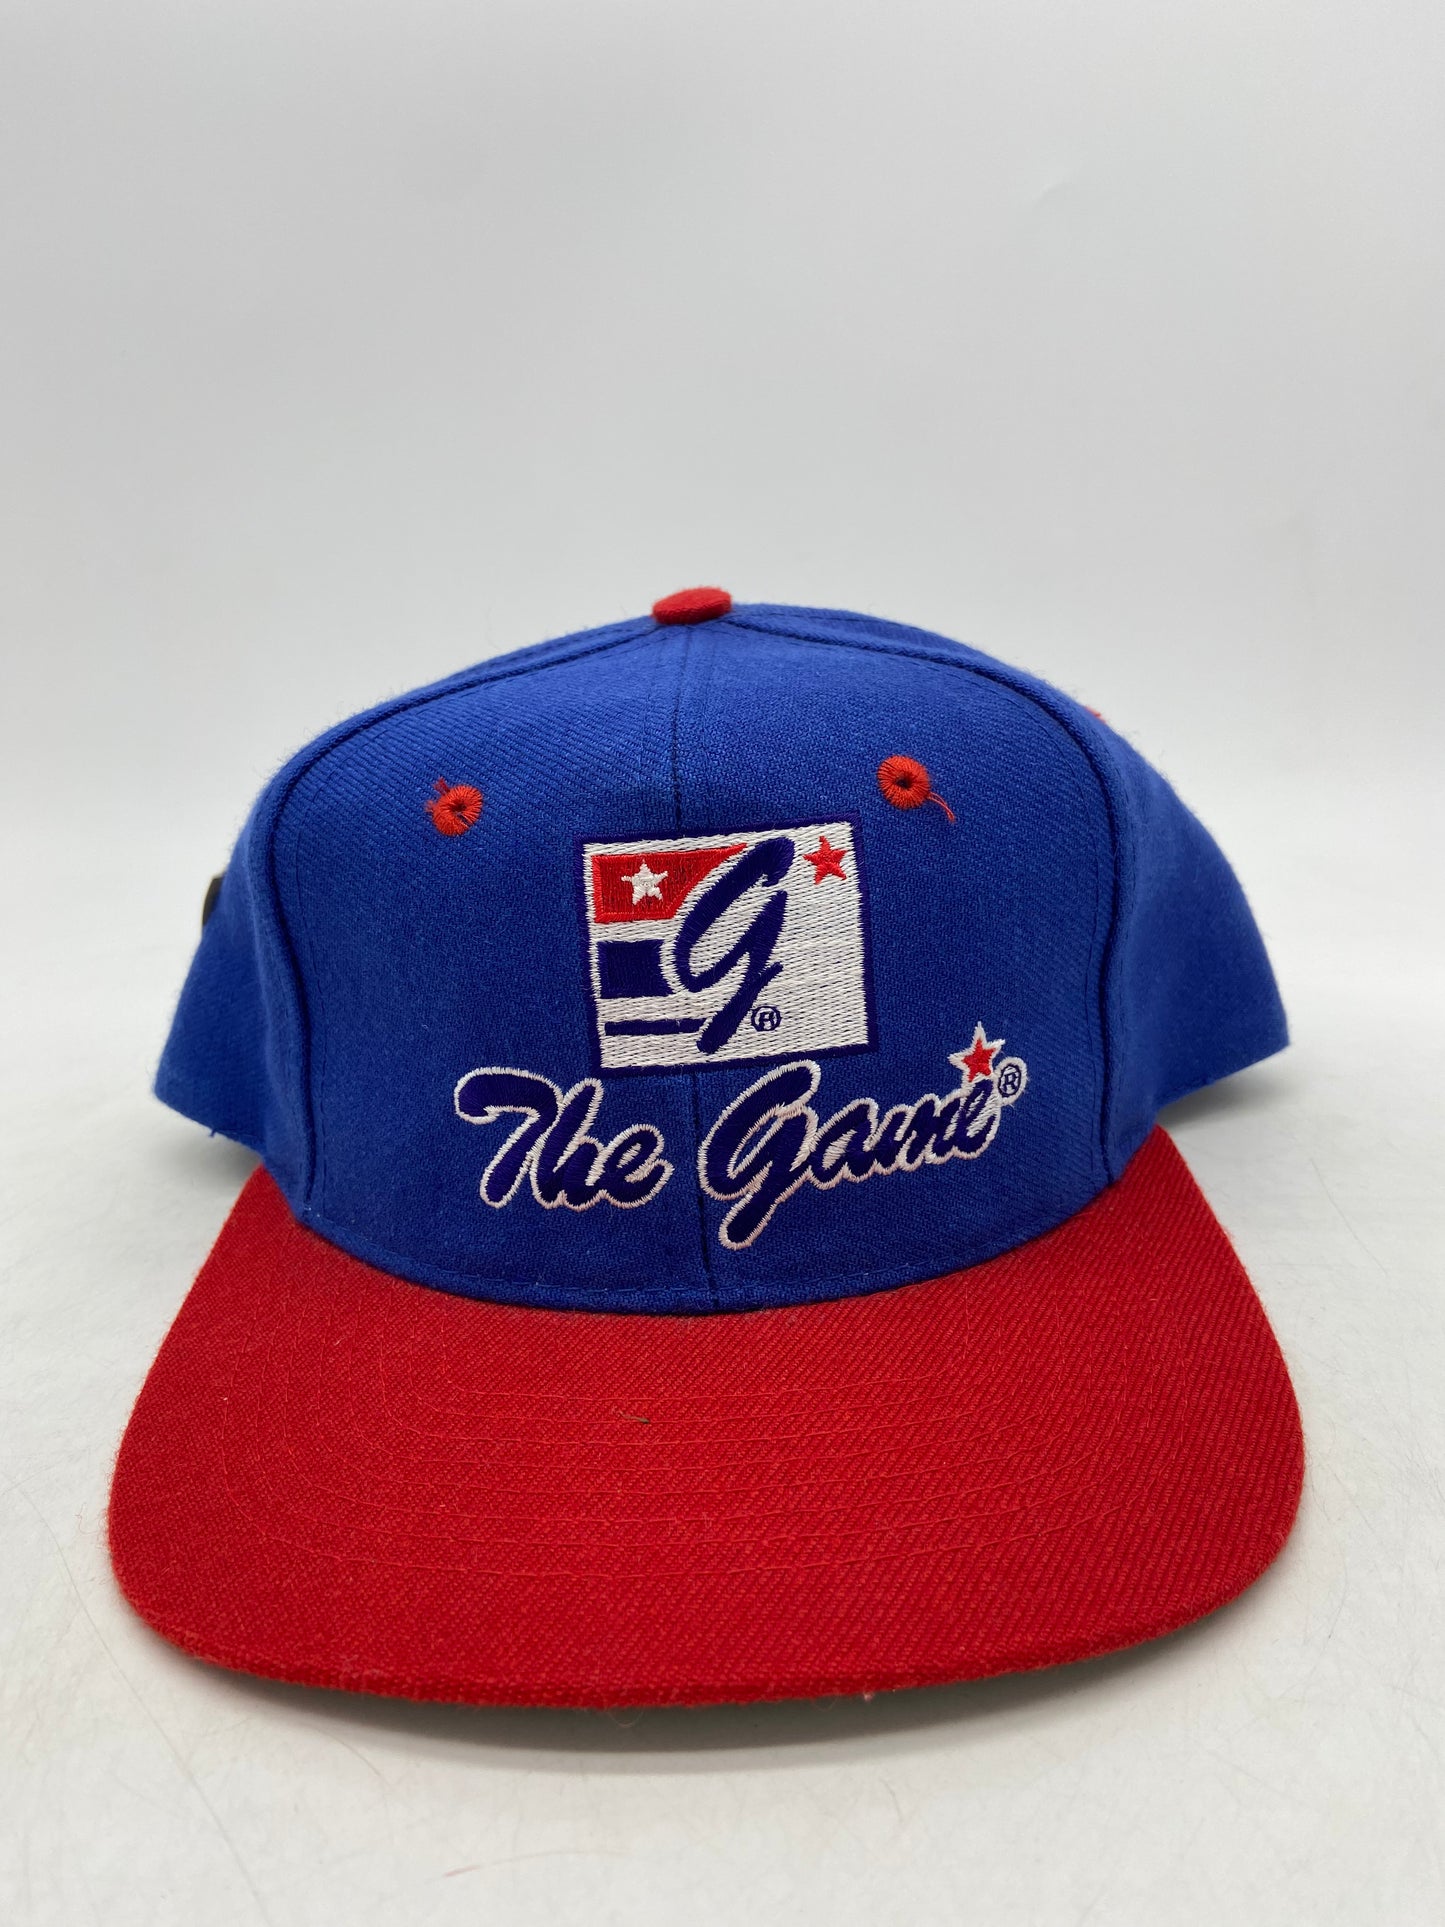 Load image into Gallery viewer, VTG The Game Wool Brand New W/ Tags Snapback
